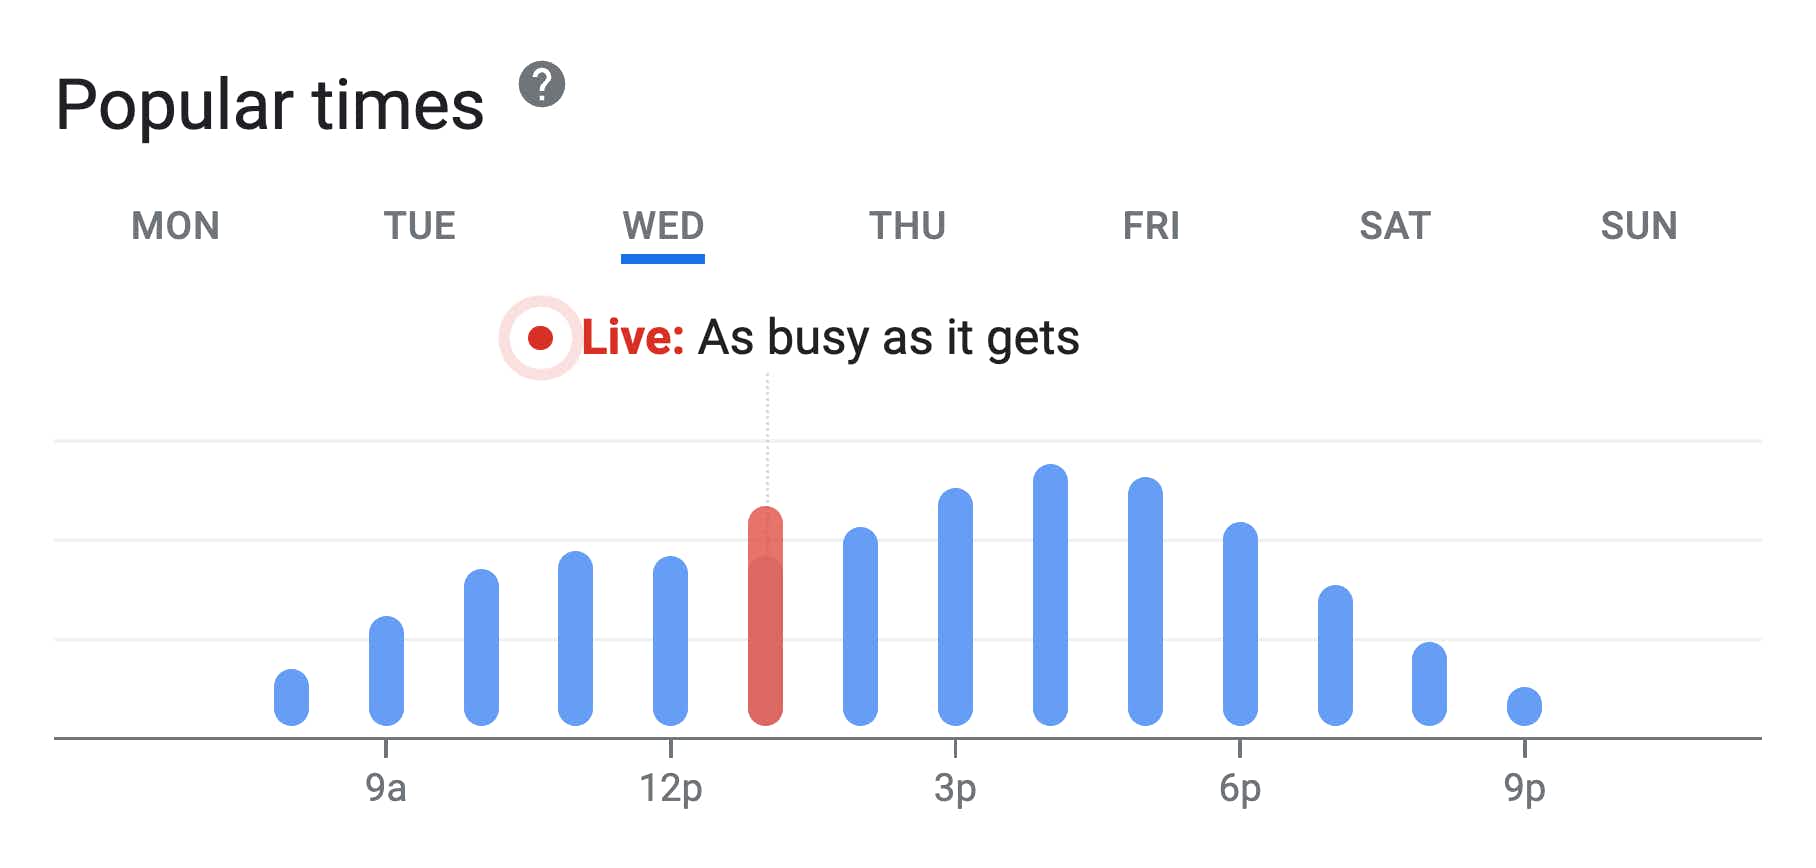 A screenshot of the Popular times chart for a Walgreens store on Google. The graph shows times throughout a specific day of the week that shows the user how busy the store is expected to be.